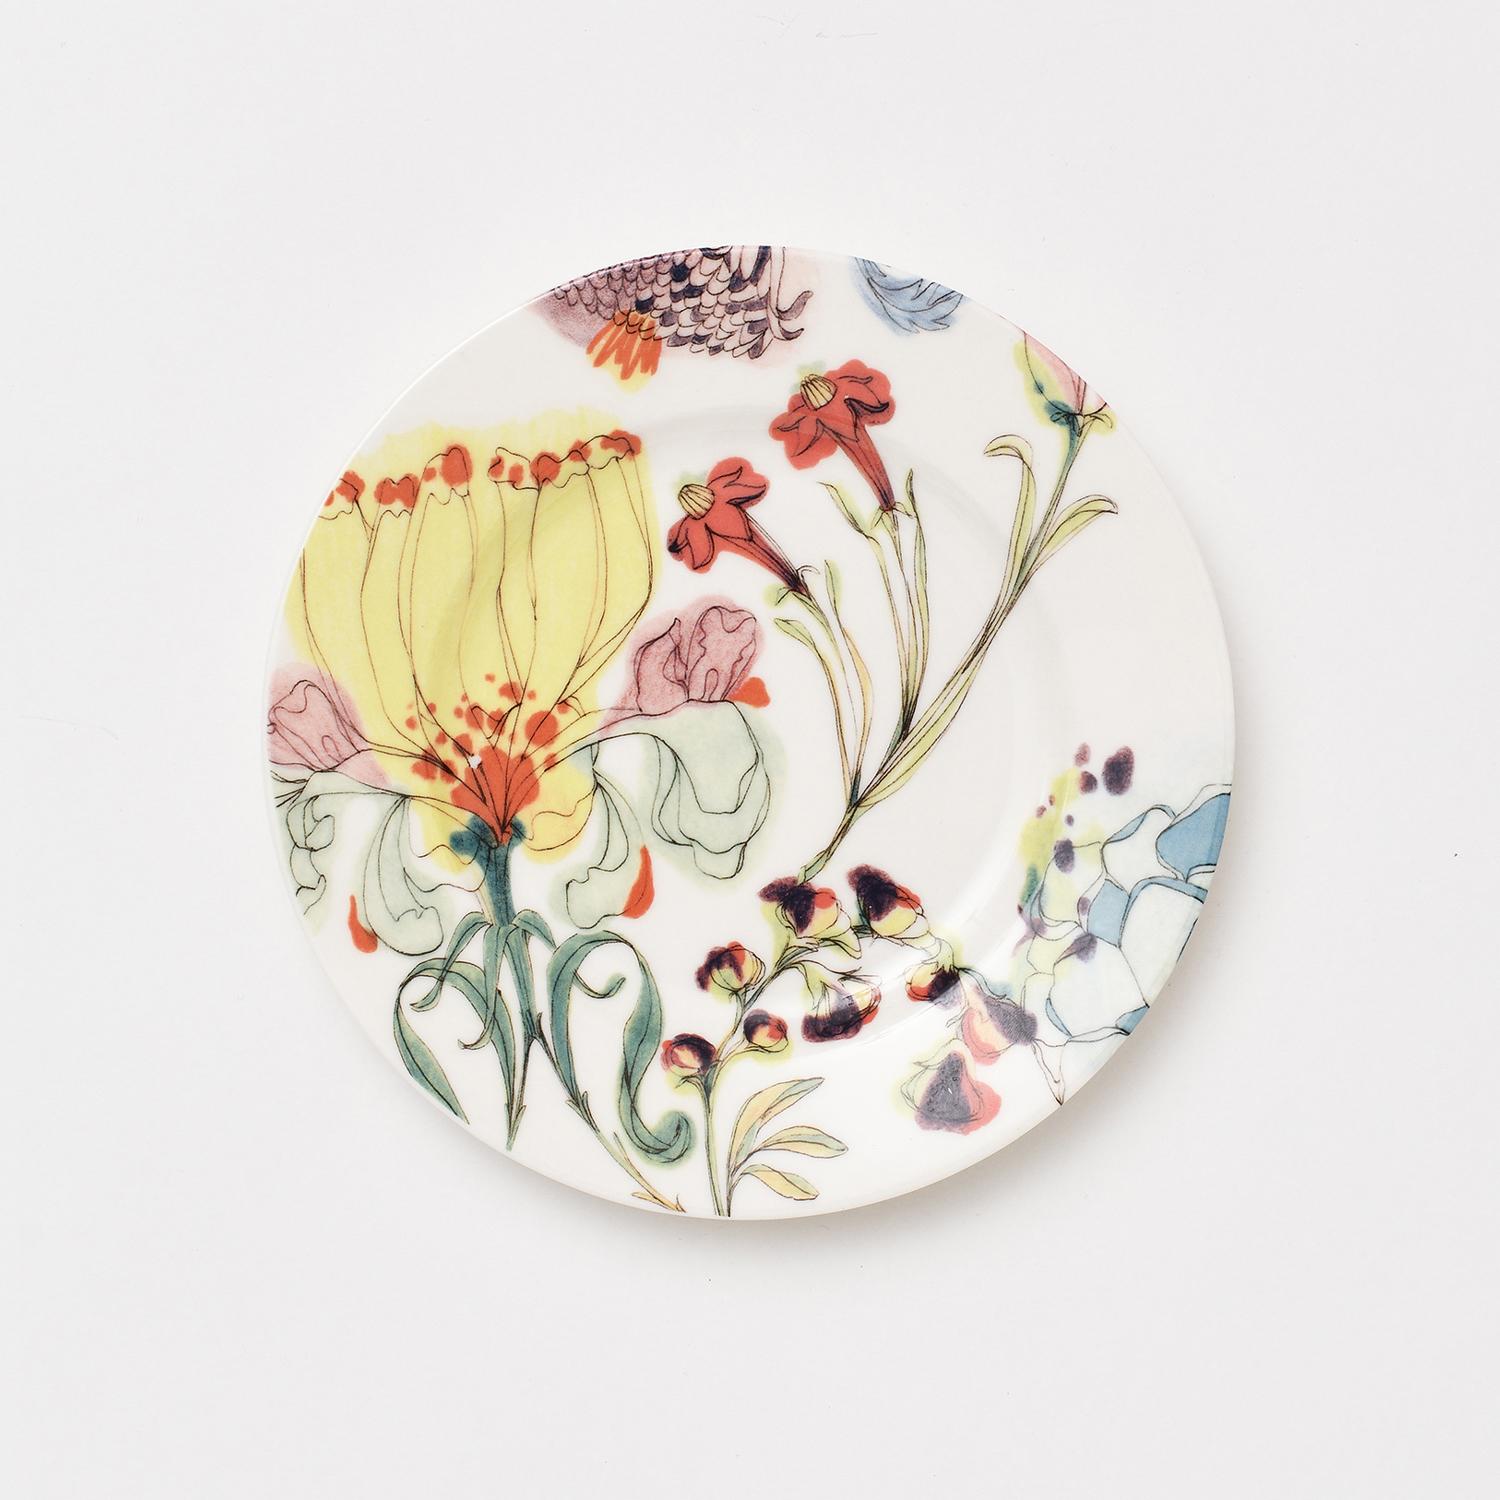 Belonging to the Grandma's Garden porcelain series, the design of these bread plates represents a sophisticated and elegant floral designs full of blossoms and buds with delicate colors blending together for a fresh and contemporary look, typical of